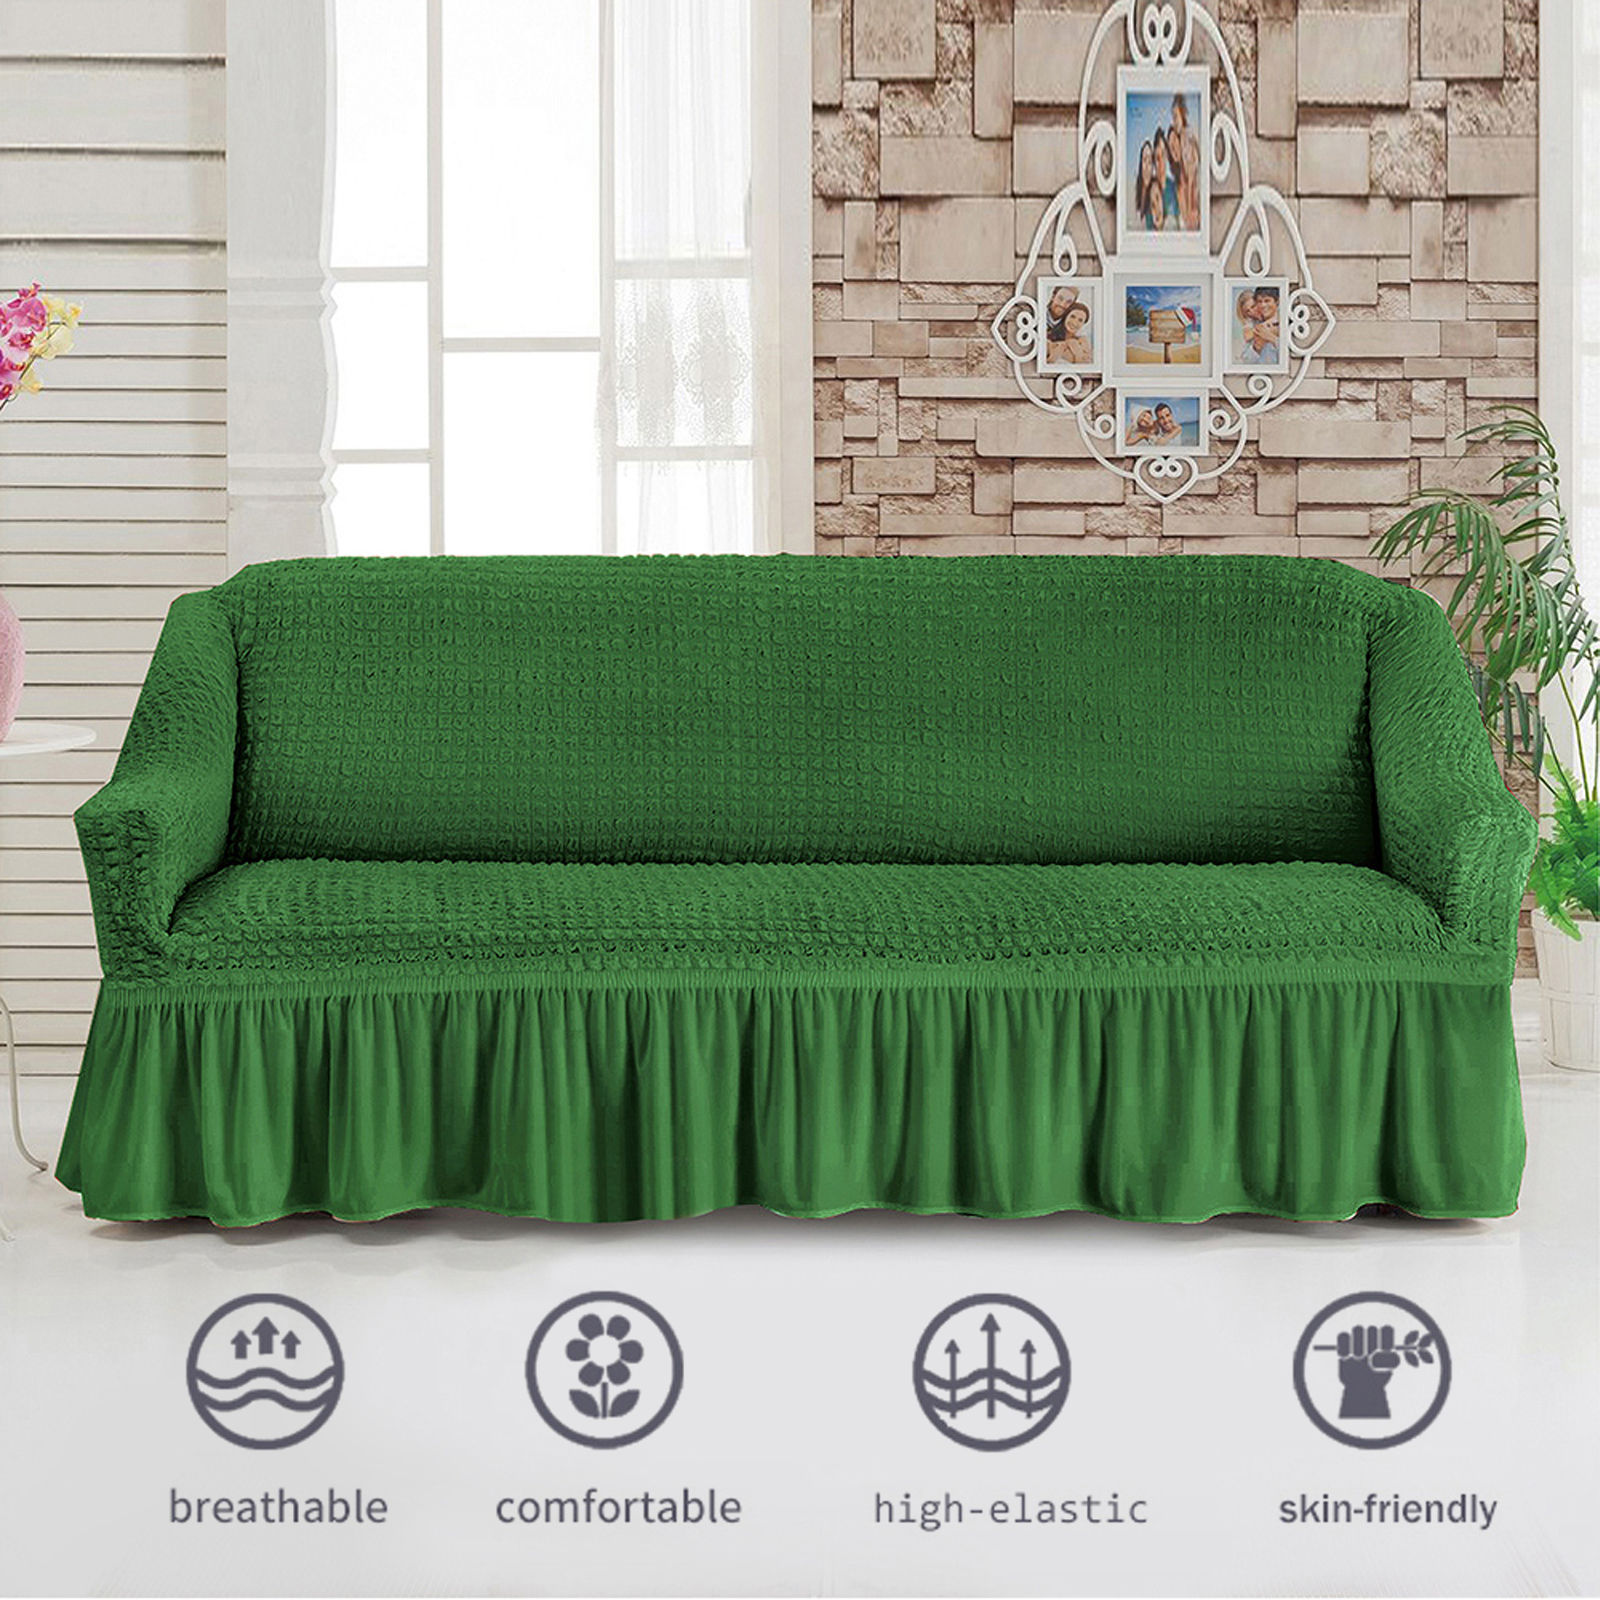 Stretch Sofa Slipcover, 3 Seater Sofa Slipcovers With Skirt With Armless Soft Sofa Cover Elastic Straps Sofa Slipcover For Living Room Kids Pets-Green A-Large